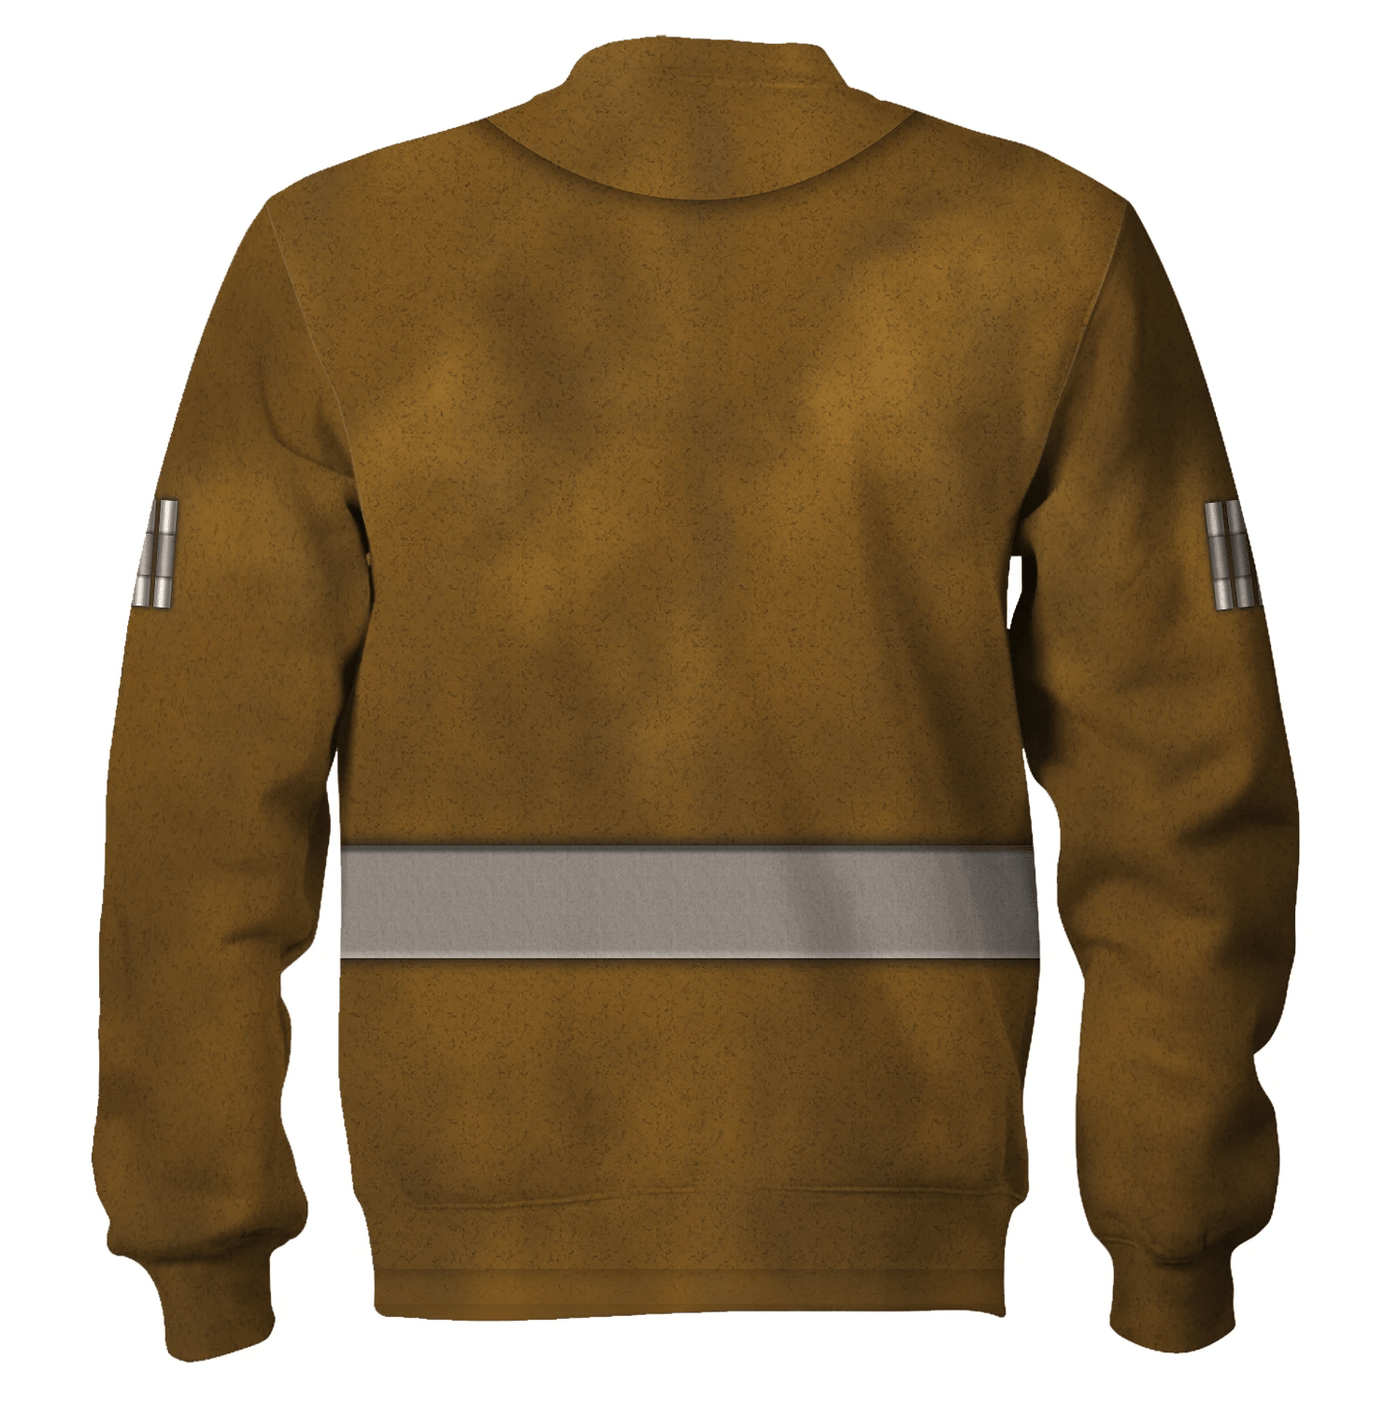 Star Wars Rose Tico Costume Cool - Sweater - Ugly Christmas Sweater